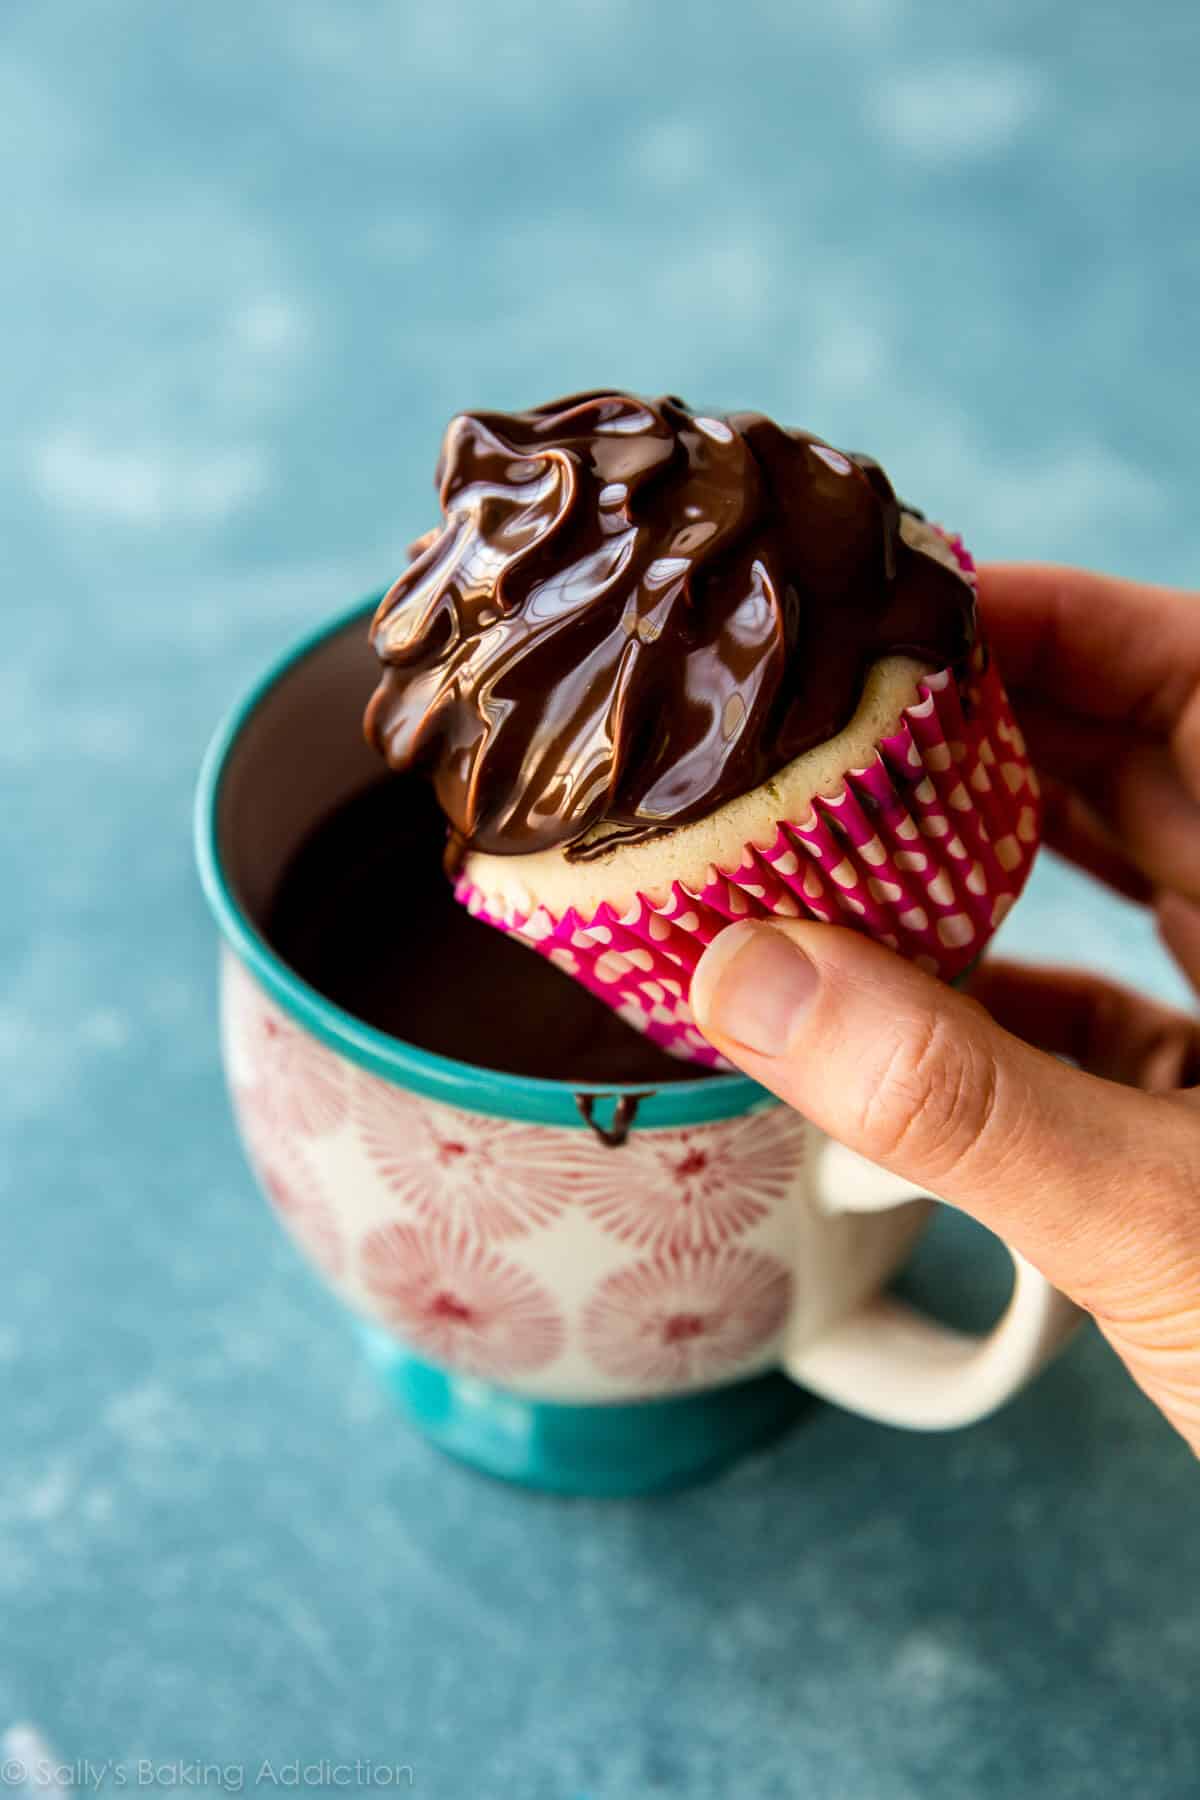 hands dunking cupcake with meringue frosting into chocolate coating